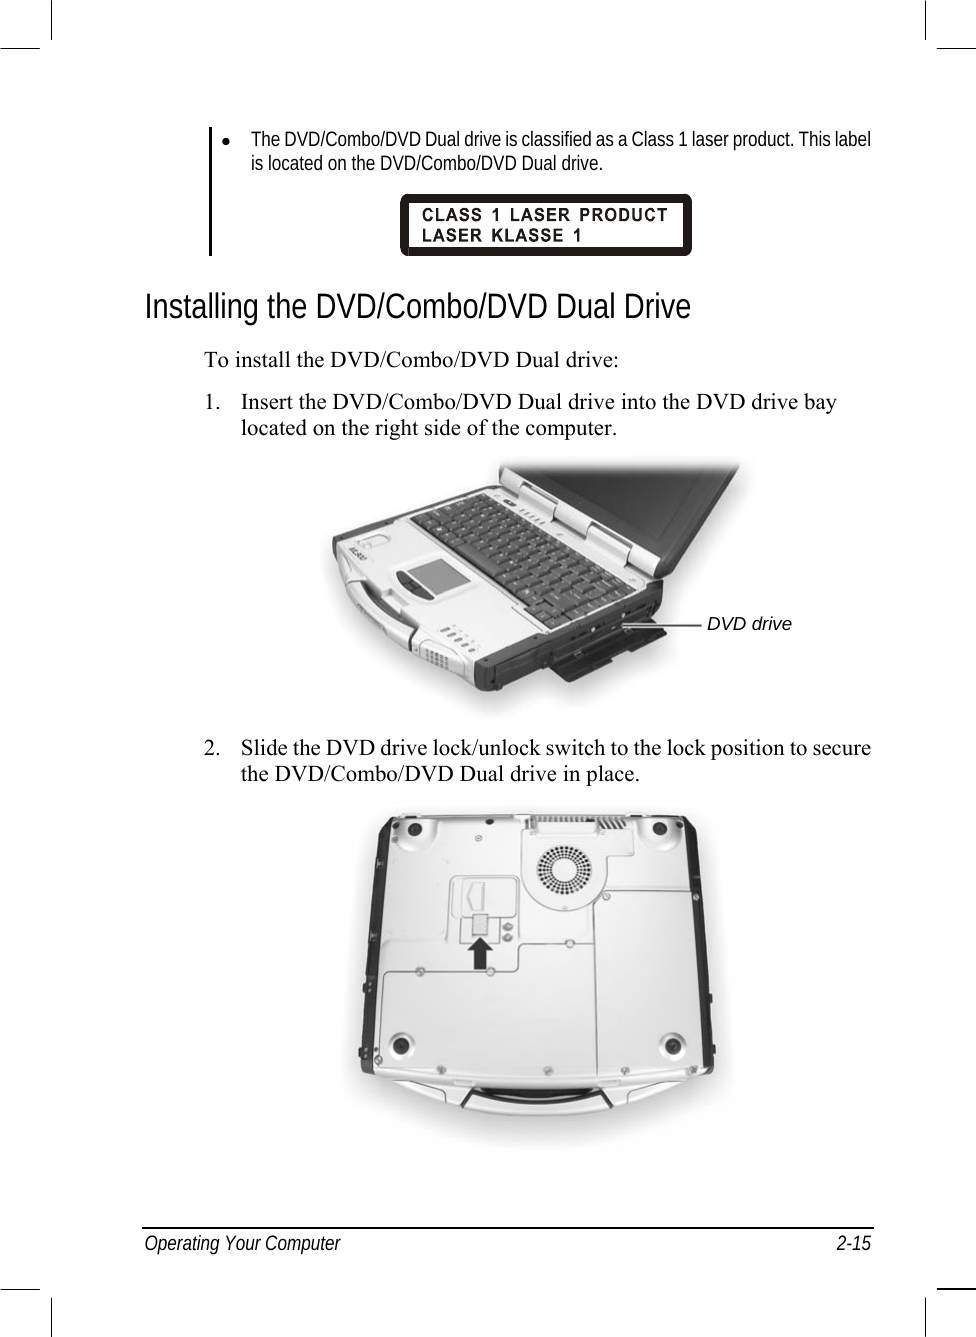  Operating Your Computer  2-15   The DVD/Combo/DVD Dual drive is classified as a Class 1 laser product. This label is located on the DVD/Combo/DVD Dual drive.   Installing the DVD/Combo/DVD Dual Drive To install the DVD/Combo/DVD Dual drive: 1.  Insert the DVD/Combo/DVD Dual drive into the DVD drive bay located on the right side of the computer.  2.  Slide the DVD drive lock/unlock switch to the lock position to secure the DVD/Combo/DVD Dual drive in place.  DVD drive 